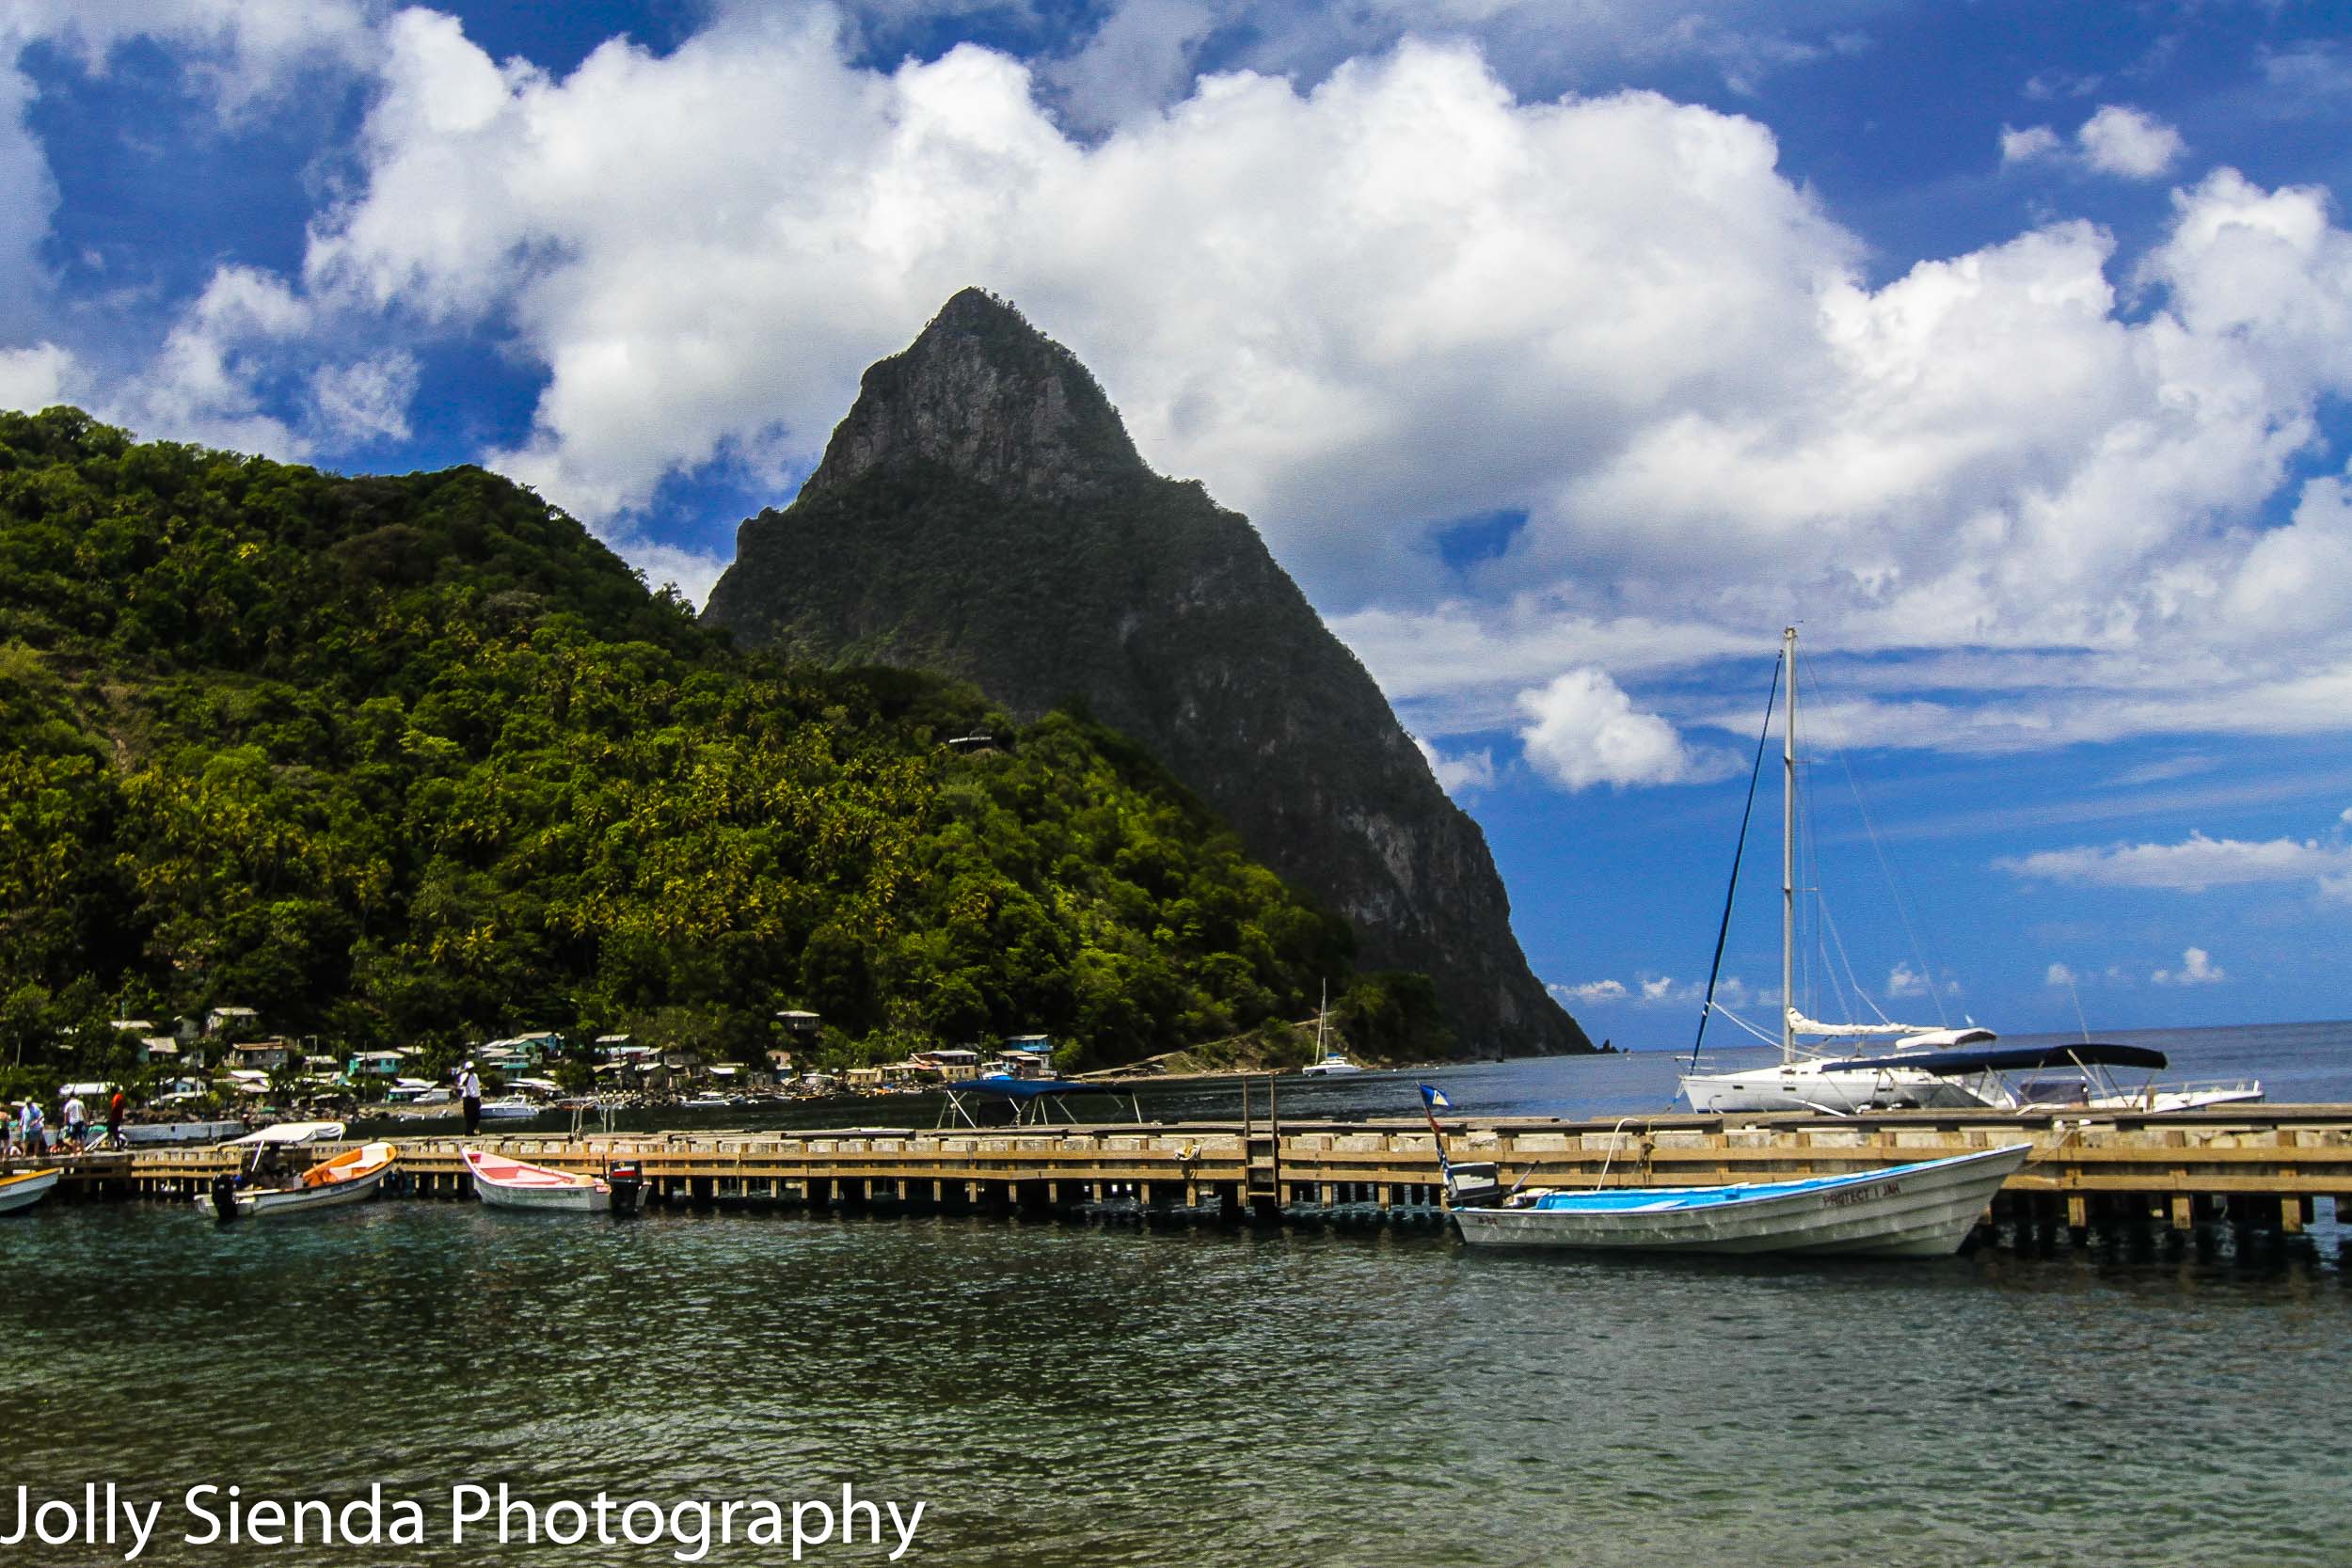 The long dock with colored boats with the Pitons and a village i